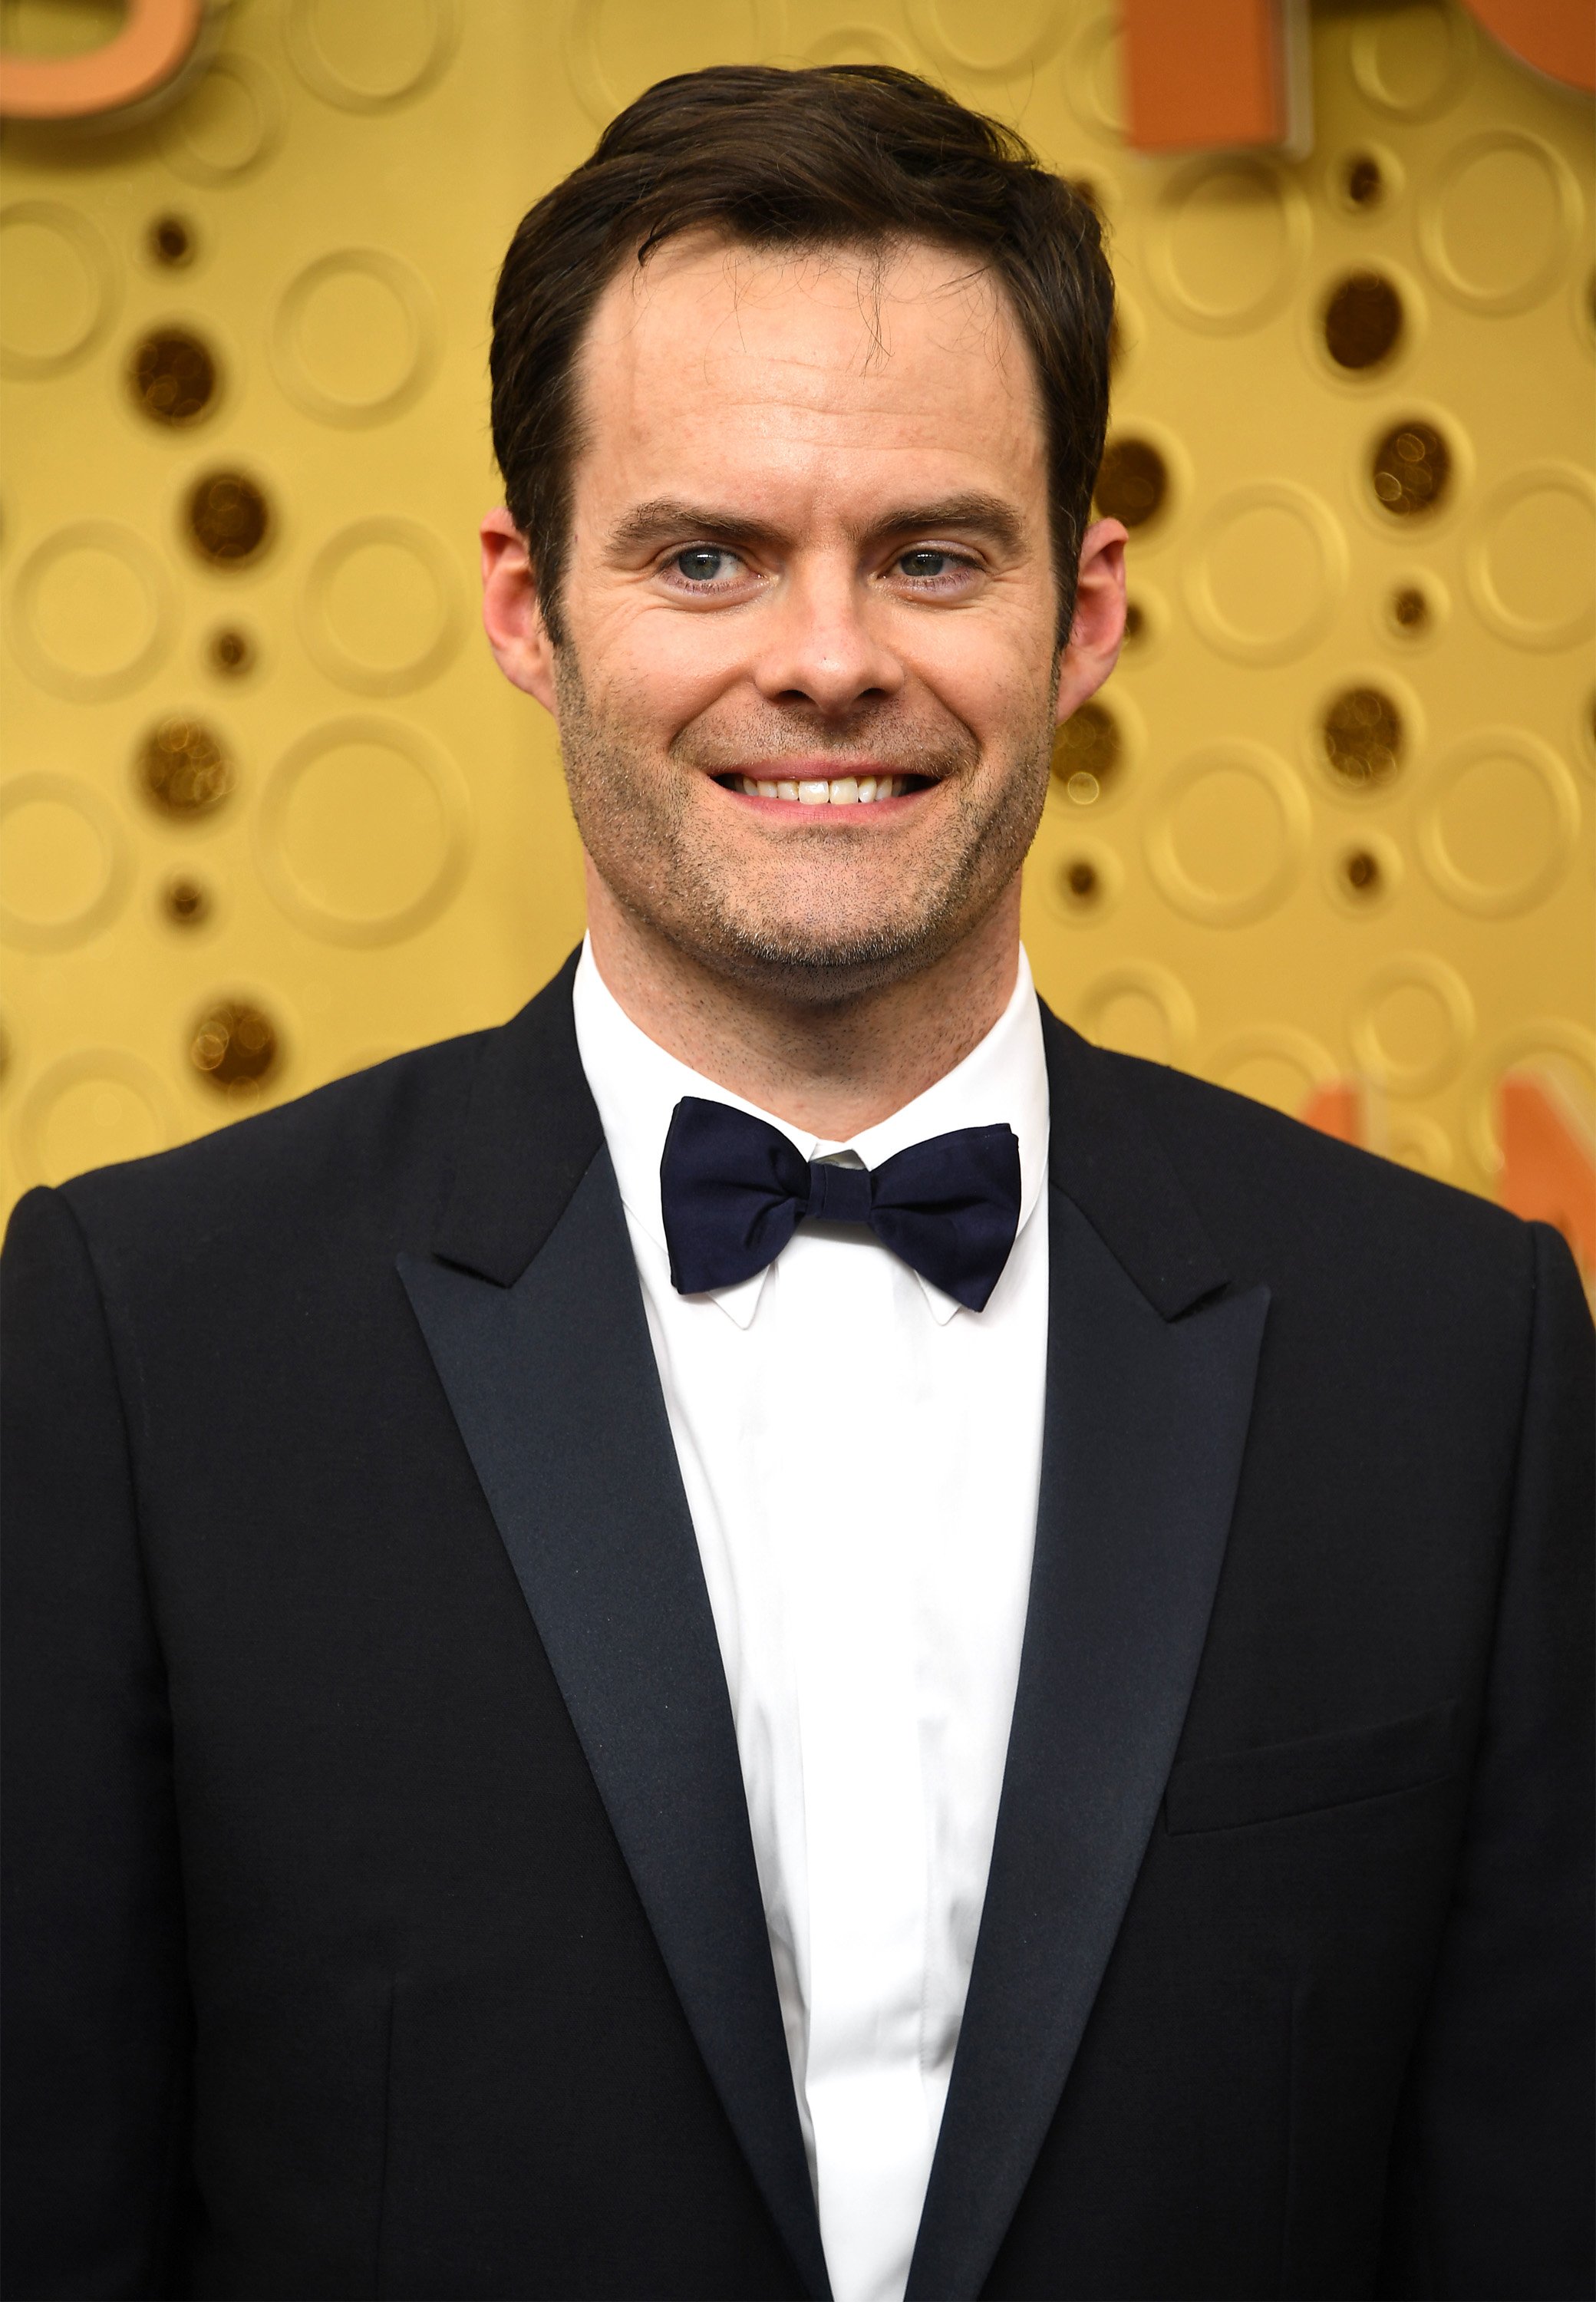  Bill Hader attends the 71st Emmy Awards at Microsoft Theater on September 22, 2019 in Los Angeles, California. | Source: Getty Images